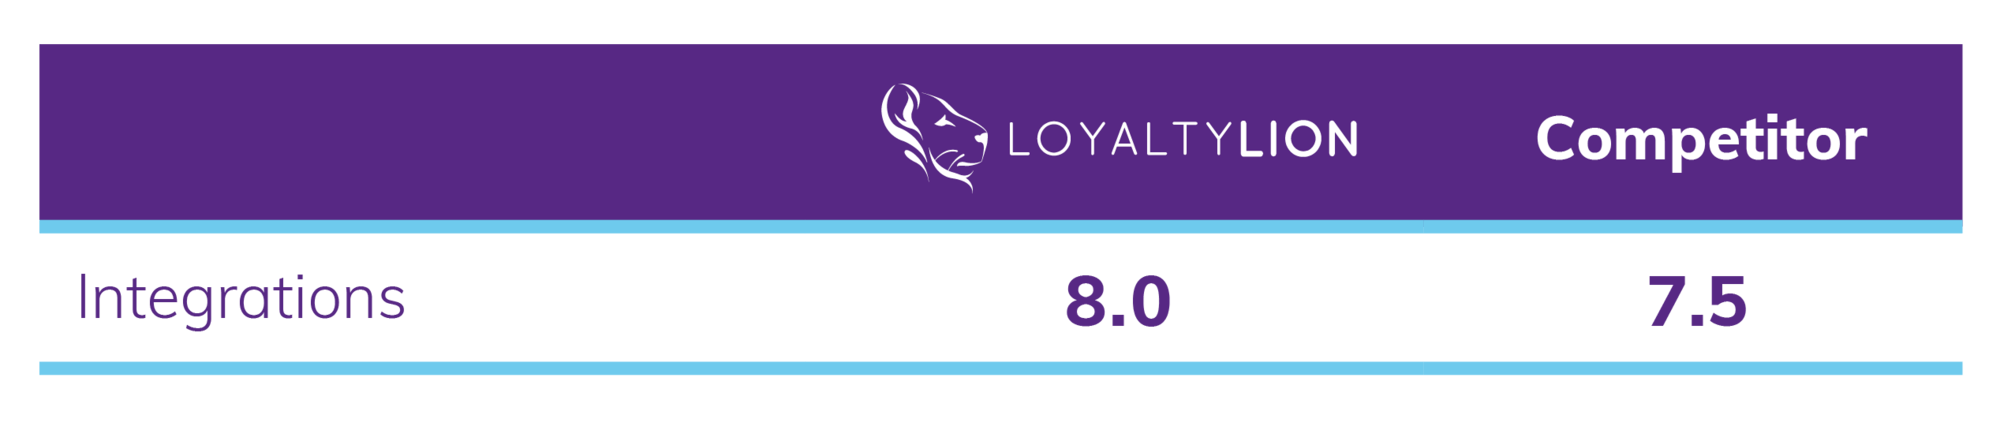 LoyaltyLion integrations comparison with a key competitor